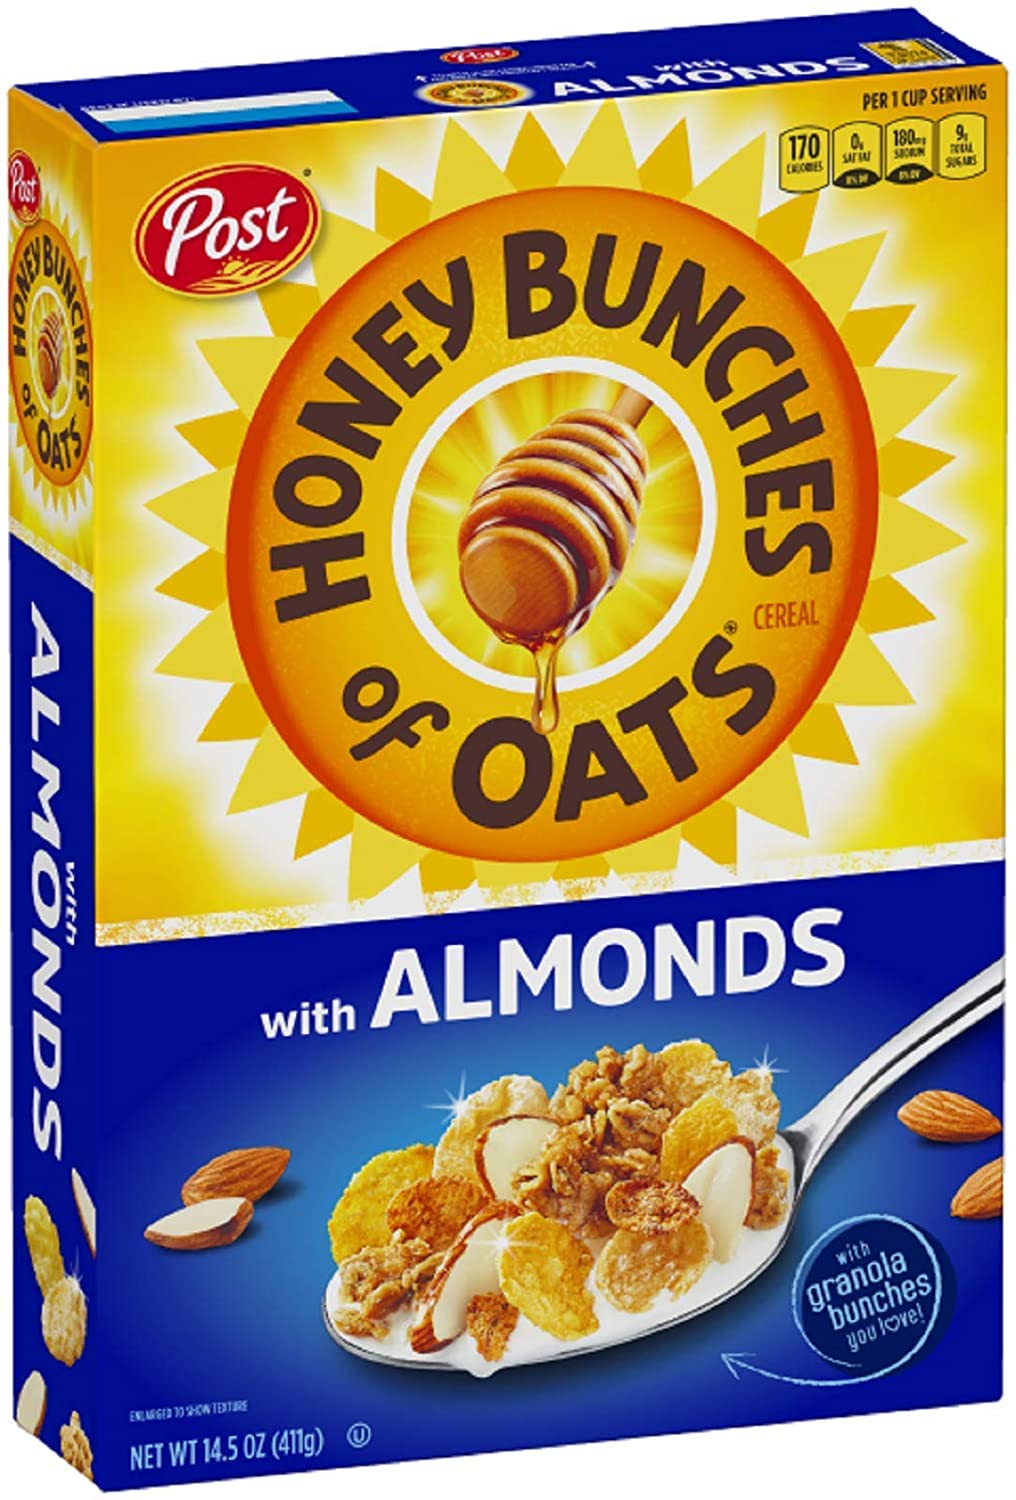 Post Honey Bunches of Oats with Almonds, 14.5oz